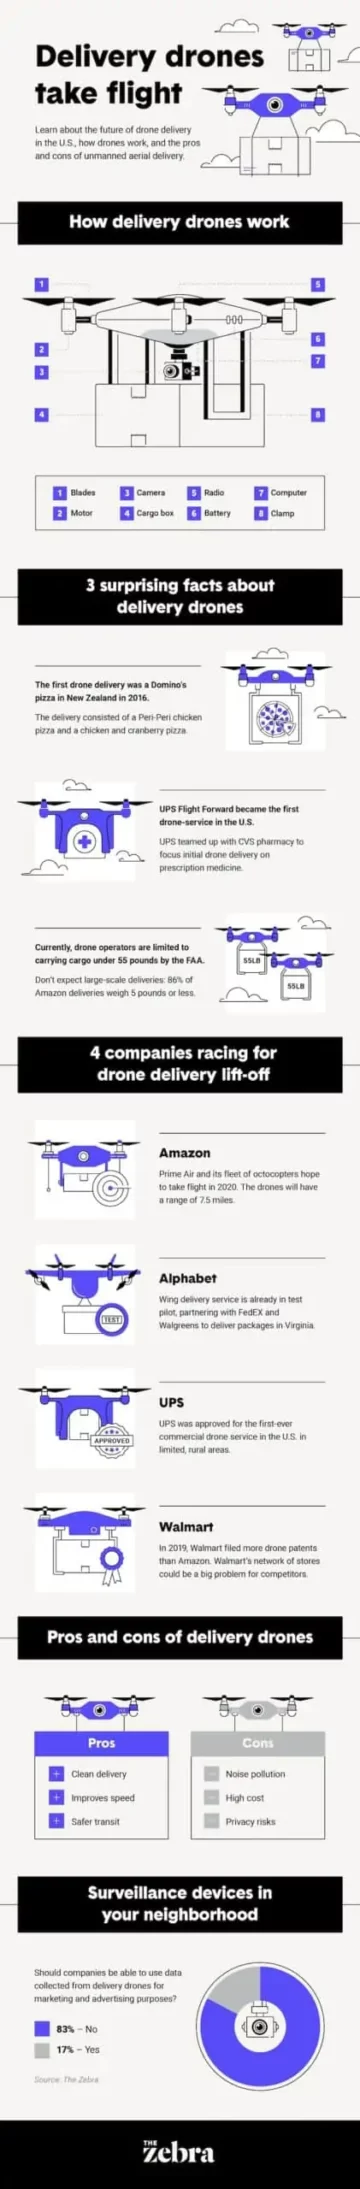 How Delivery Drones Work! (Infographic) - Supply Chain Game Changer™